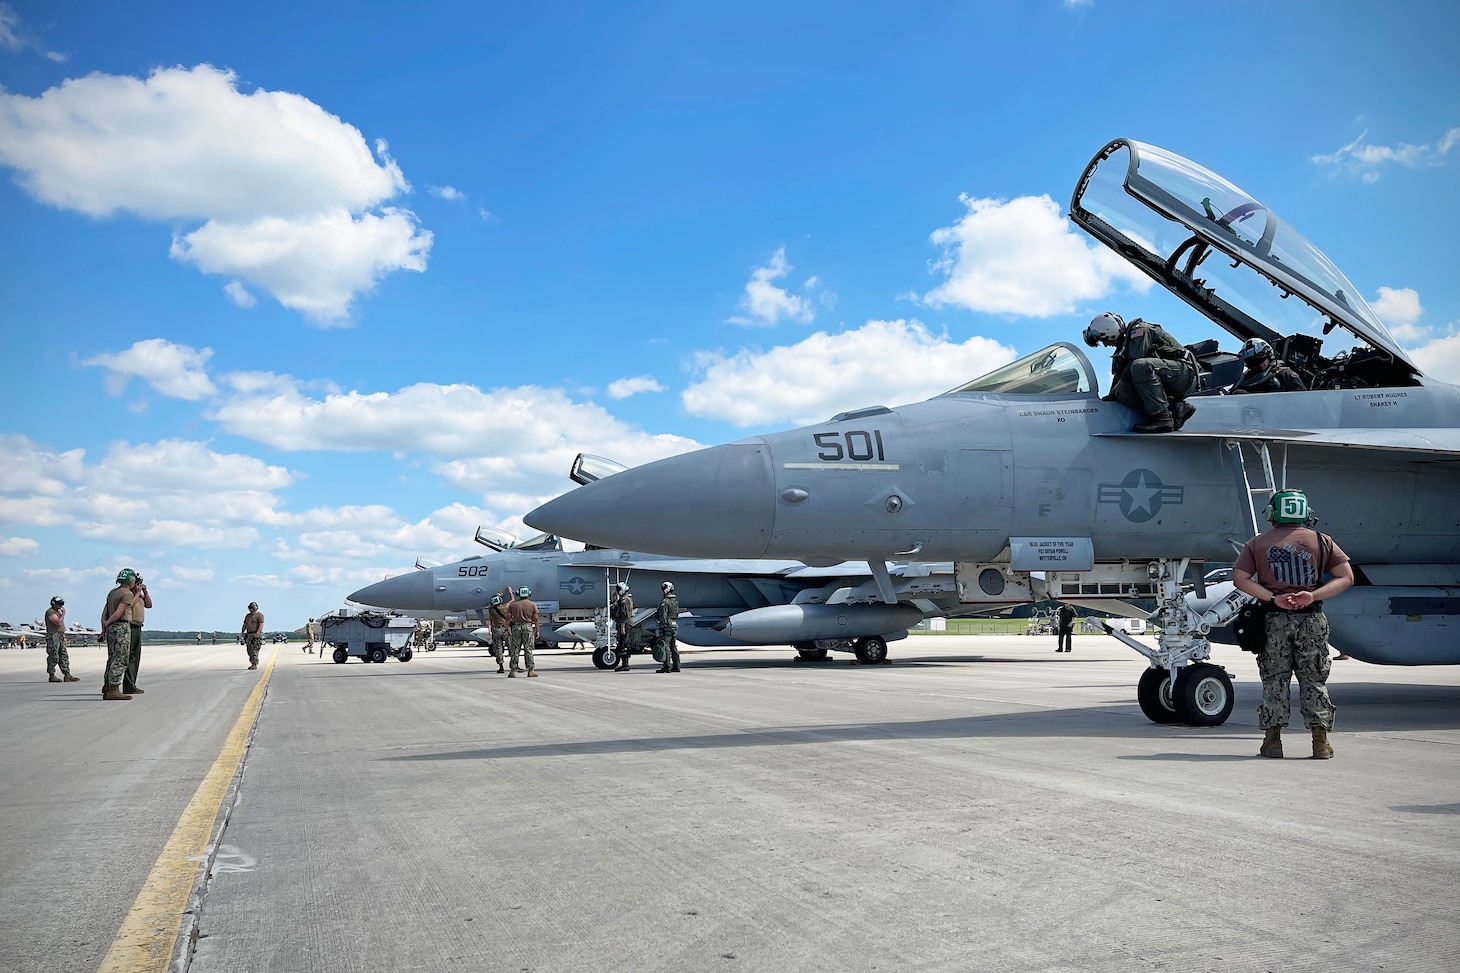 CAMP DOUGLAS, Wisc. (Aug. 17, 2021) EA-18G Growlers assigned to the "Star Warriors" of Electronic Attack Squadron (VAQ) 209 prepare for flight operations during Northern Lightning 2021 at Volk Field National Guard Base. Northern Lightning is a full-spectrum Counterland training exercise hosted at Volk Field Air National Guard Base. The goal of the exercise is to provide a tailored, cost effective and realistic combat training for the Department of Defense Total Force. (U.S. Navy photo by Cmdr. Pete Scheu)